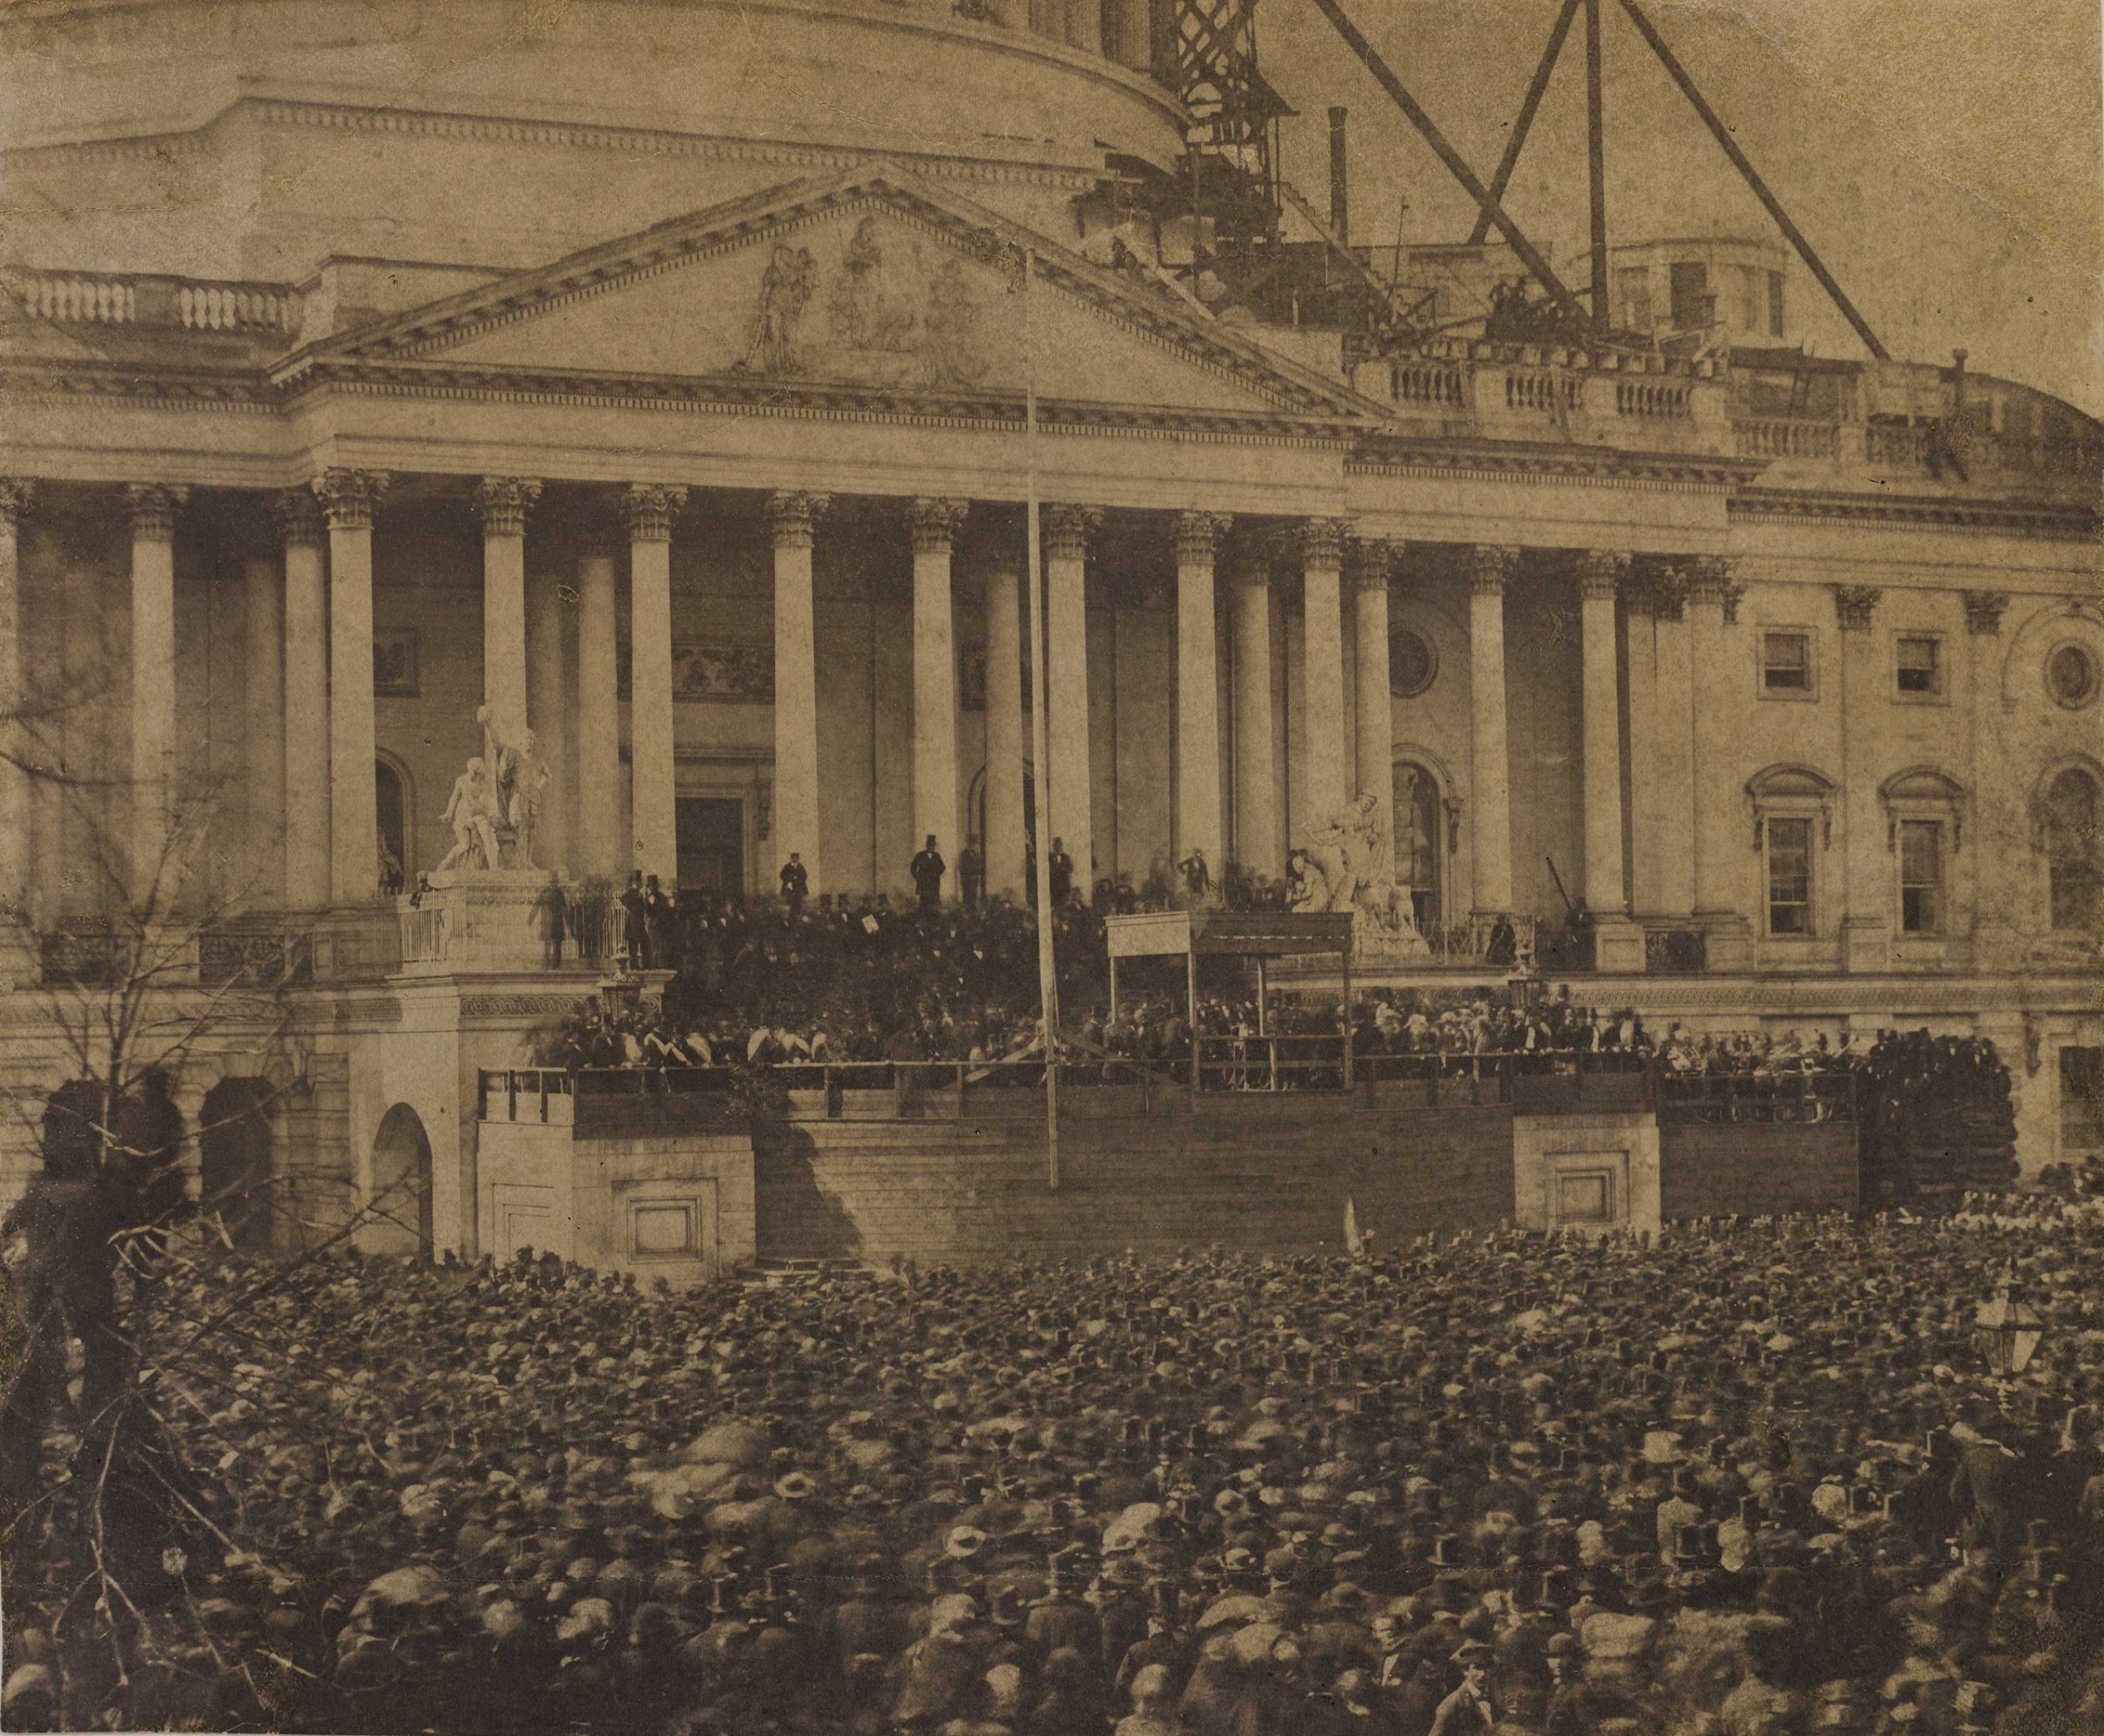 Rare photo of The first inaugural of Abraham Lincoln, March 4, 1861.